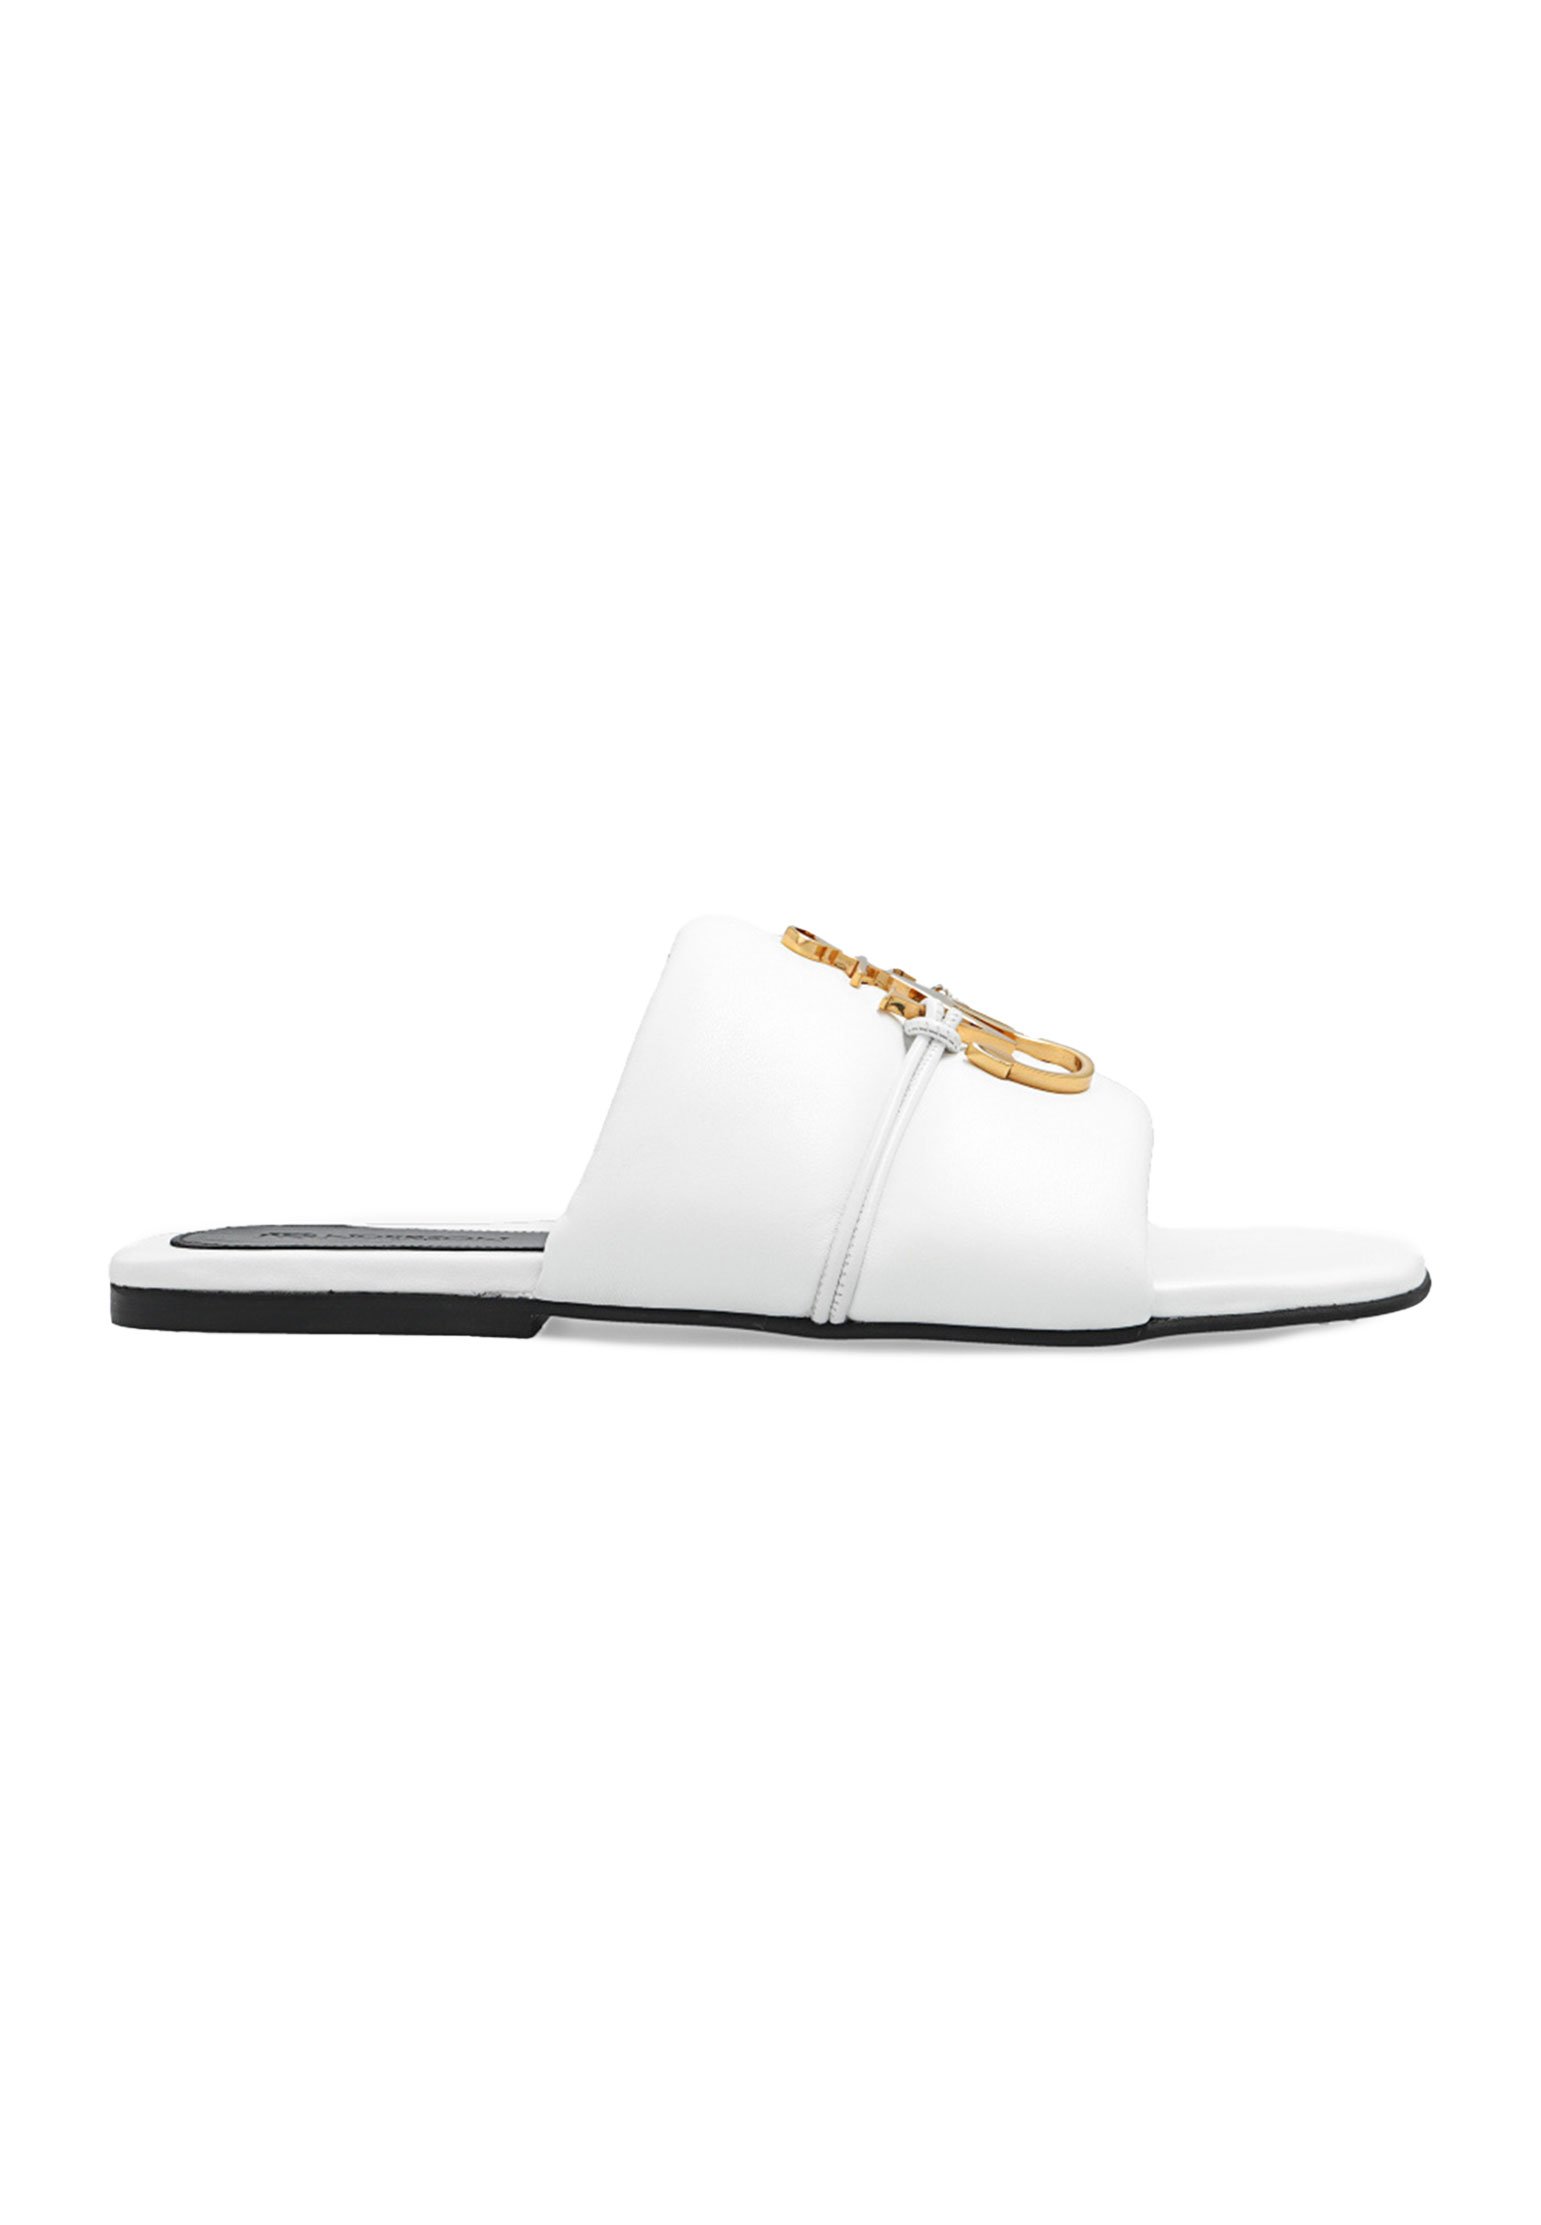 Slippers J.W. ANDERSON Color: white (Code: 1354) in online store Allure